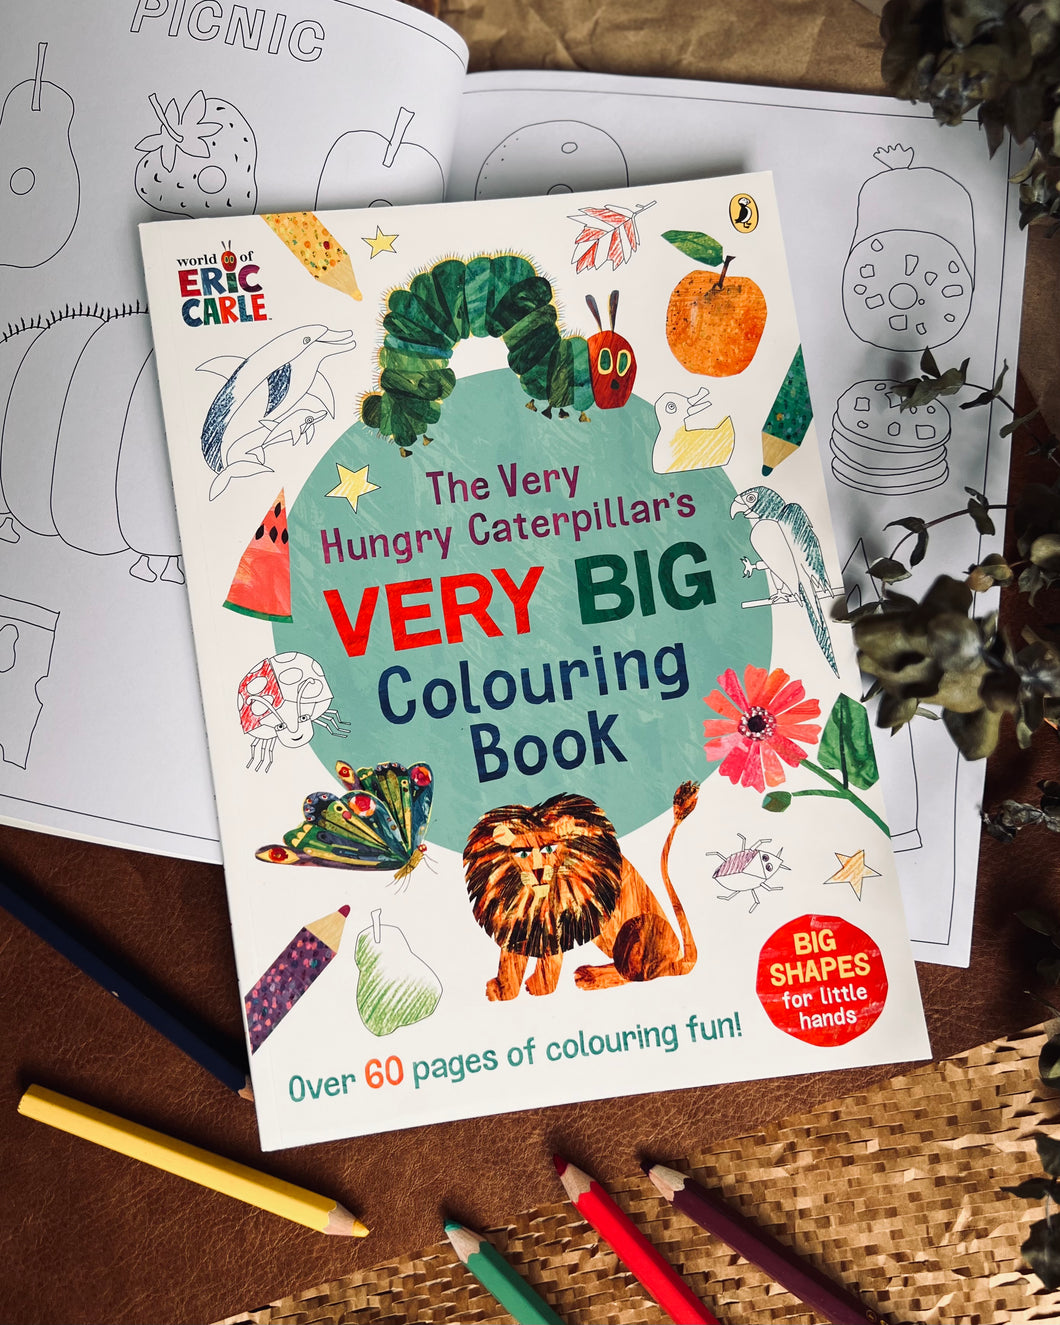 Very Hungry Caterpillar Very Big Colouring Book